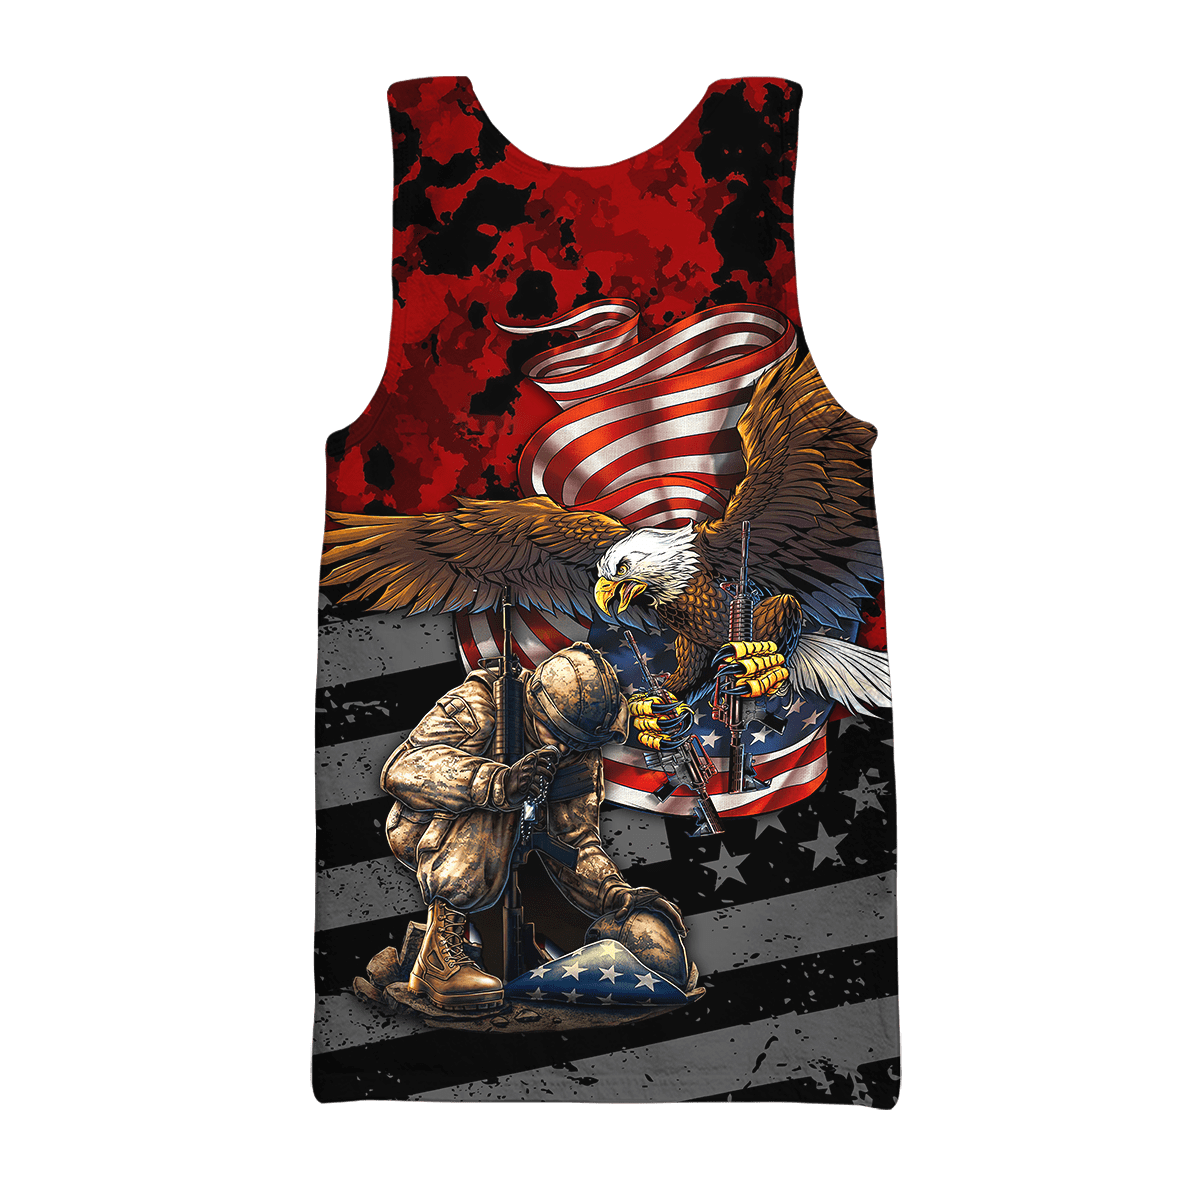 US Veteran - Eagle With American Flag Unisex Shirts